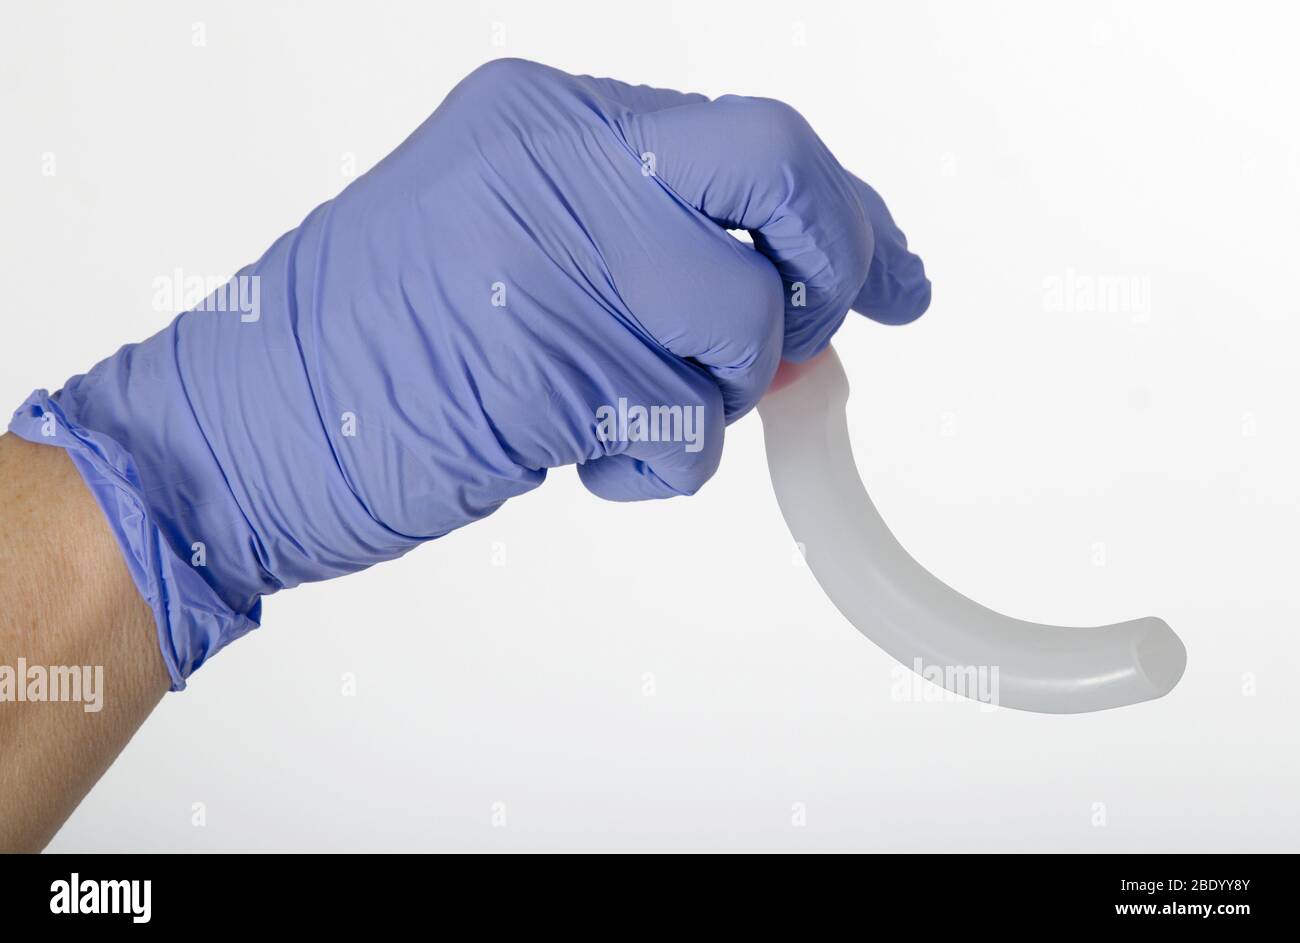 Oral (oropharyngeal) Airway Device Stock Photo